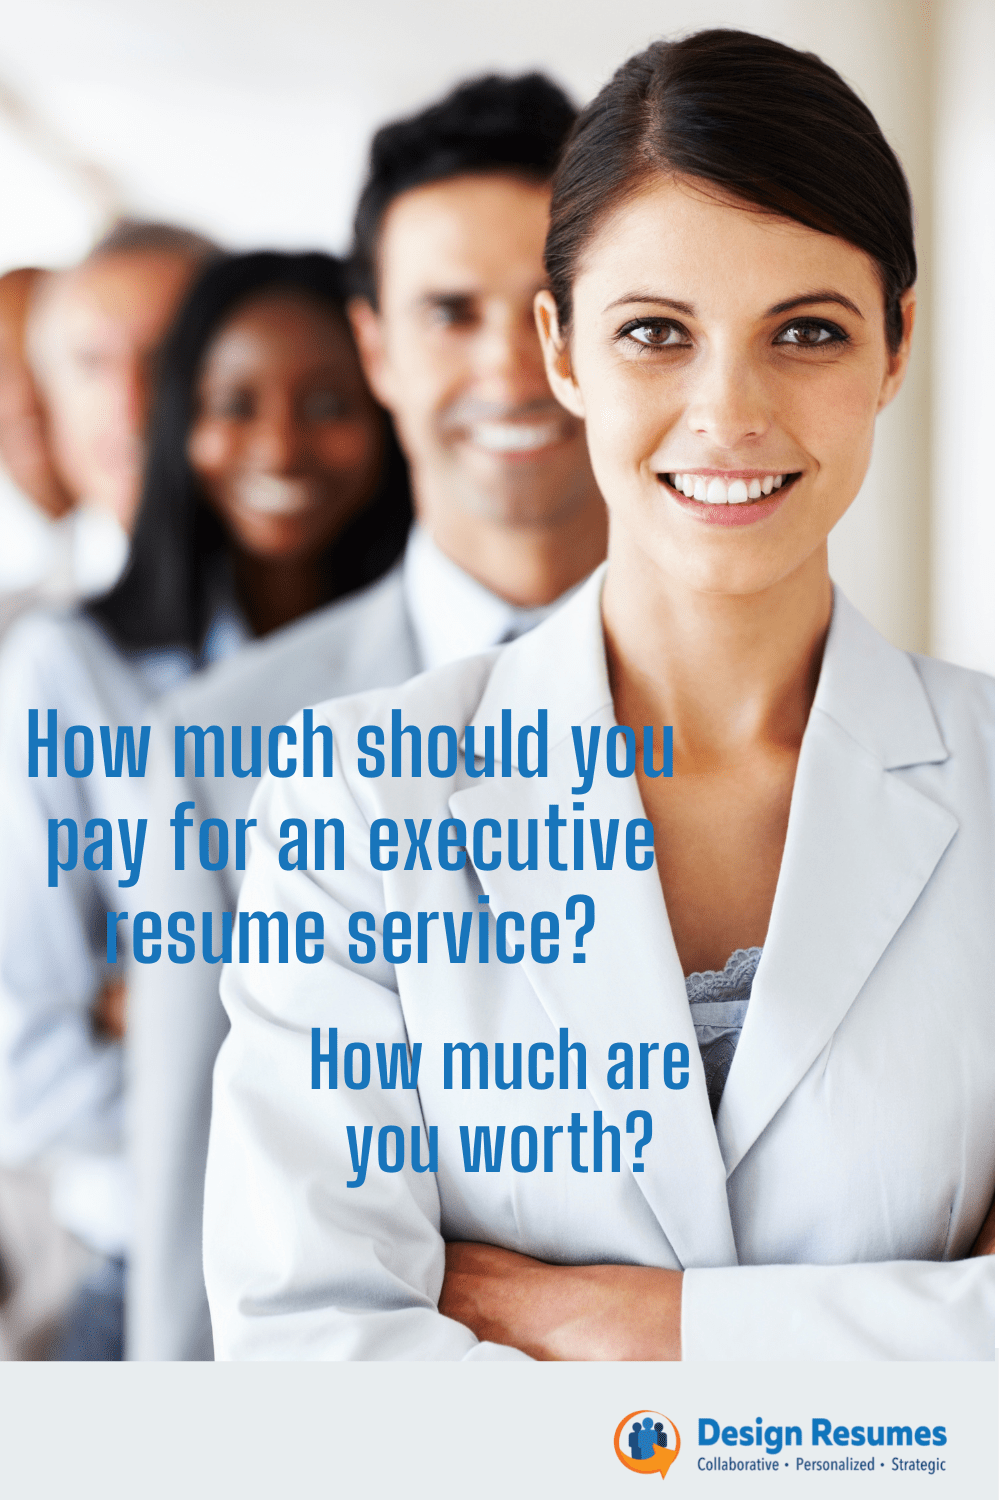 How much should you pay for a resume service?